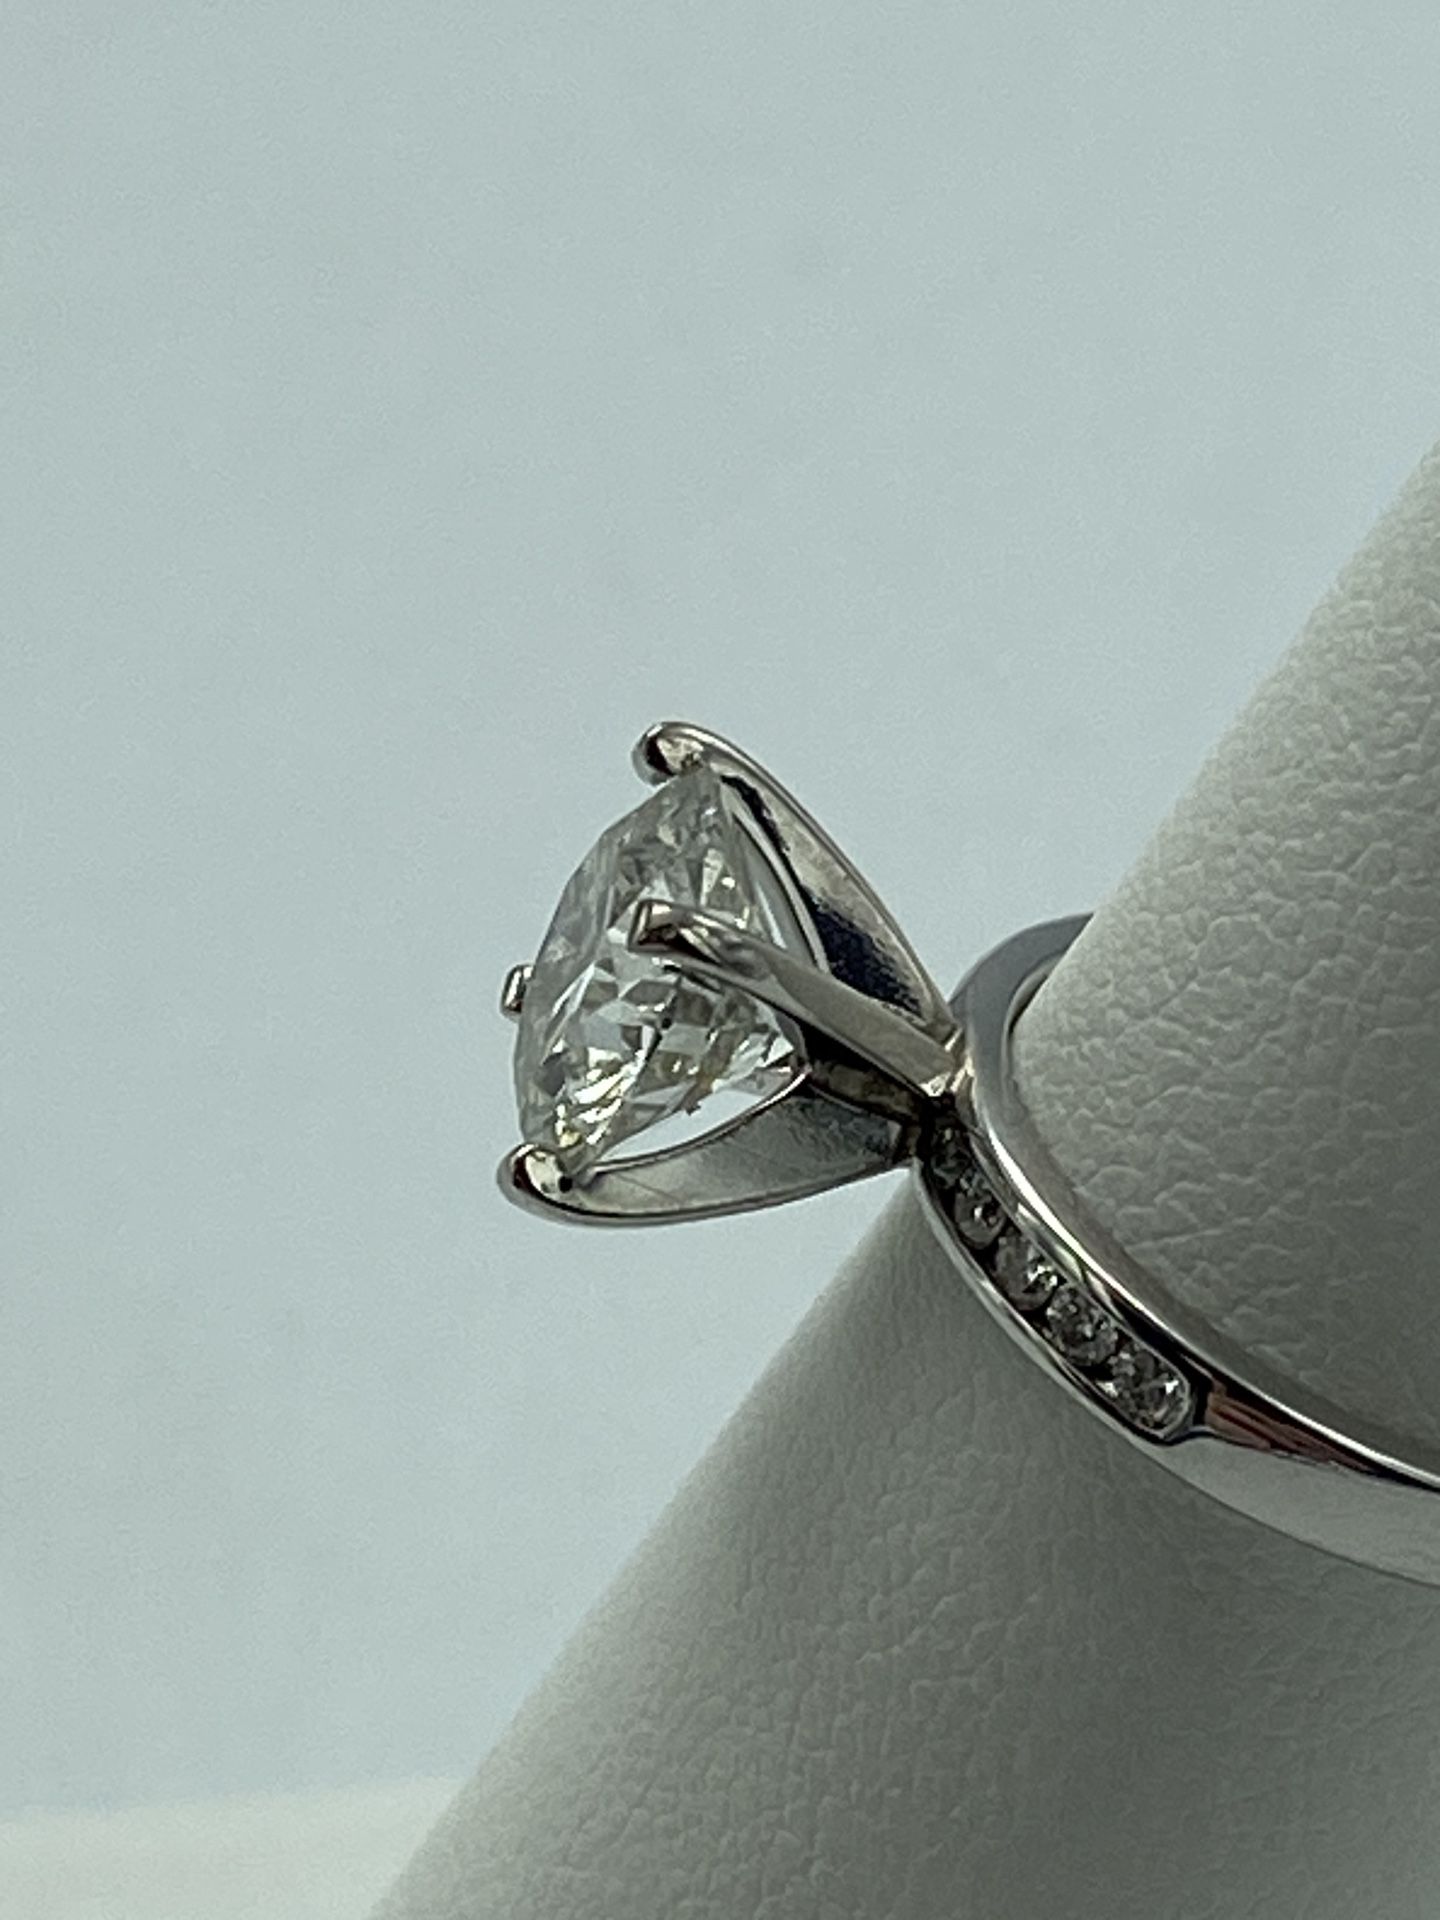 14kt White Gold Engagement Ring With 2.32ct Round Diamond